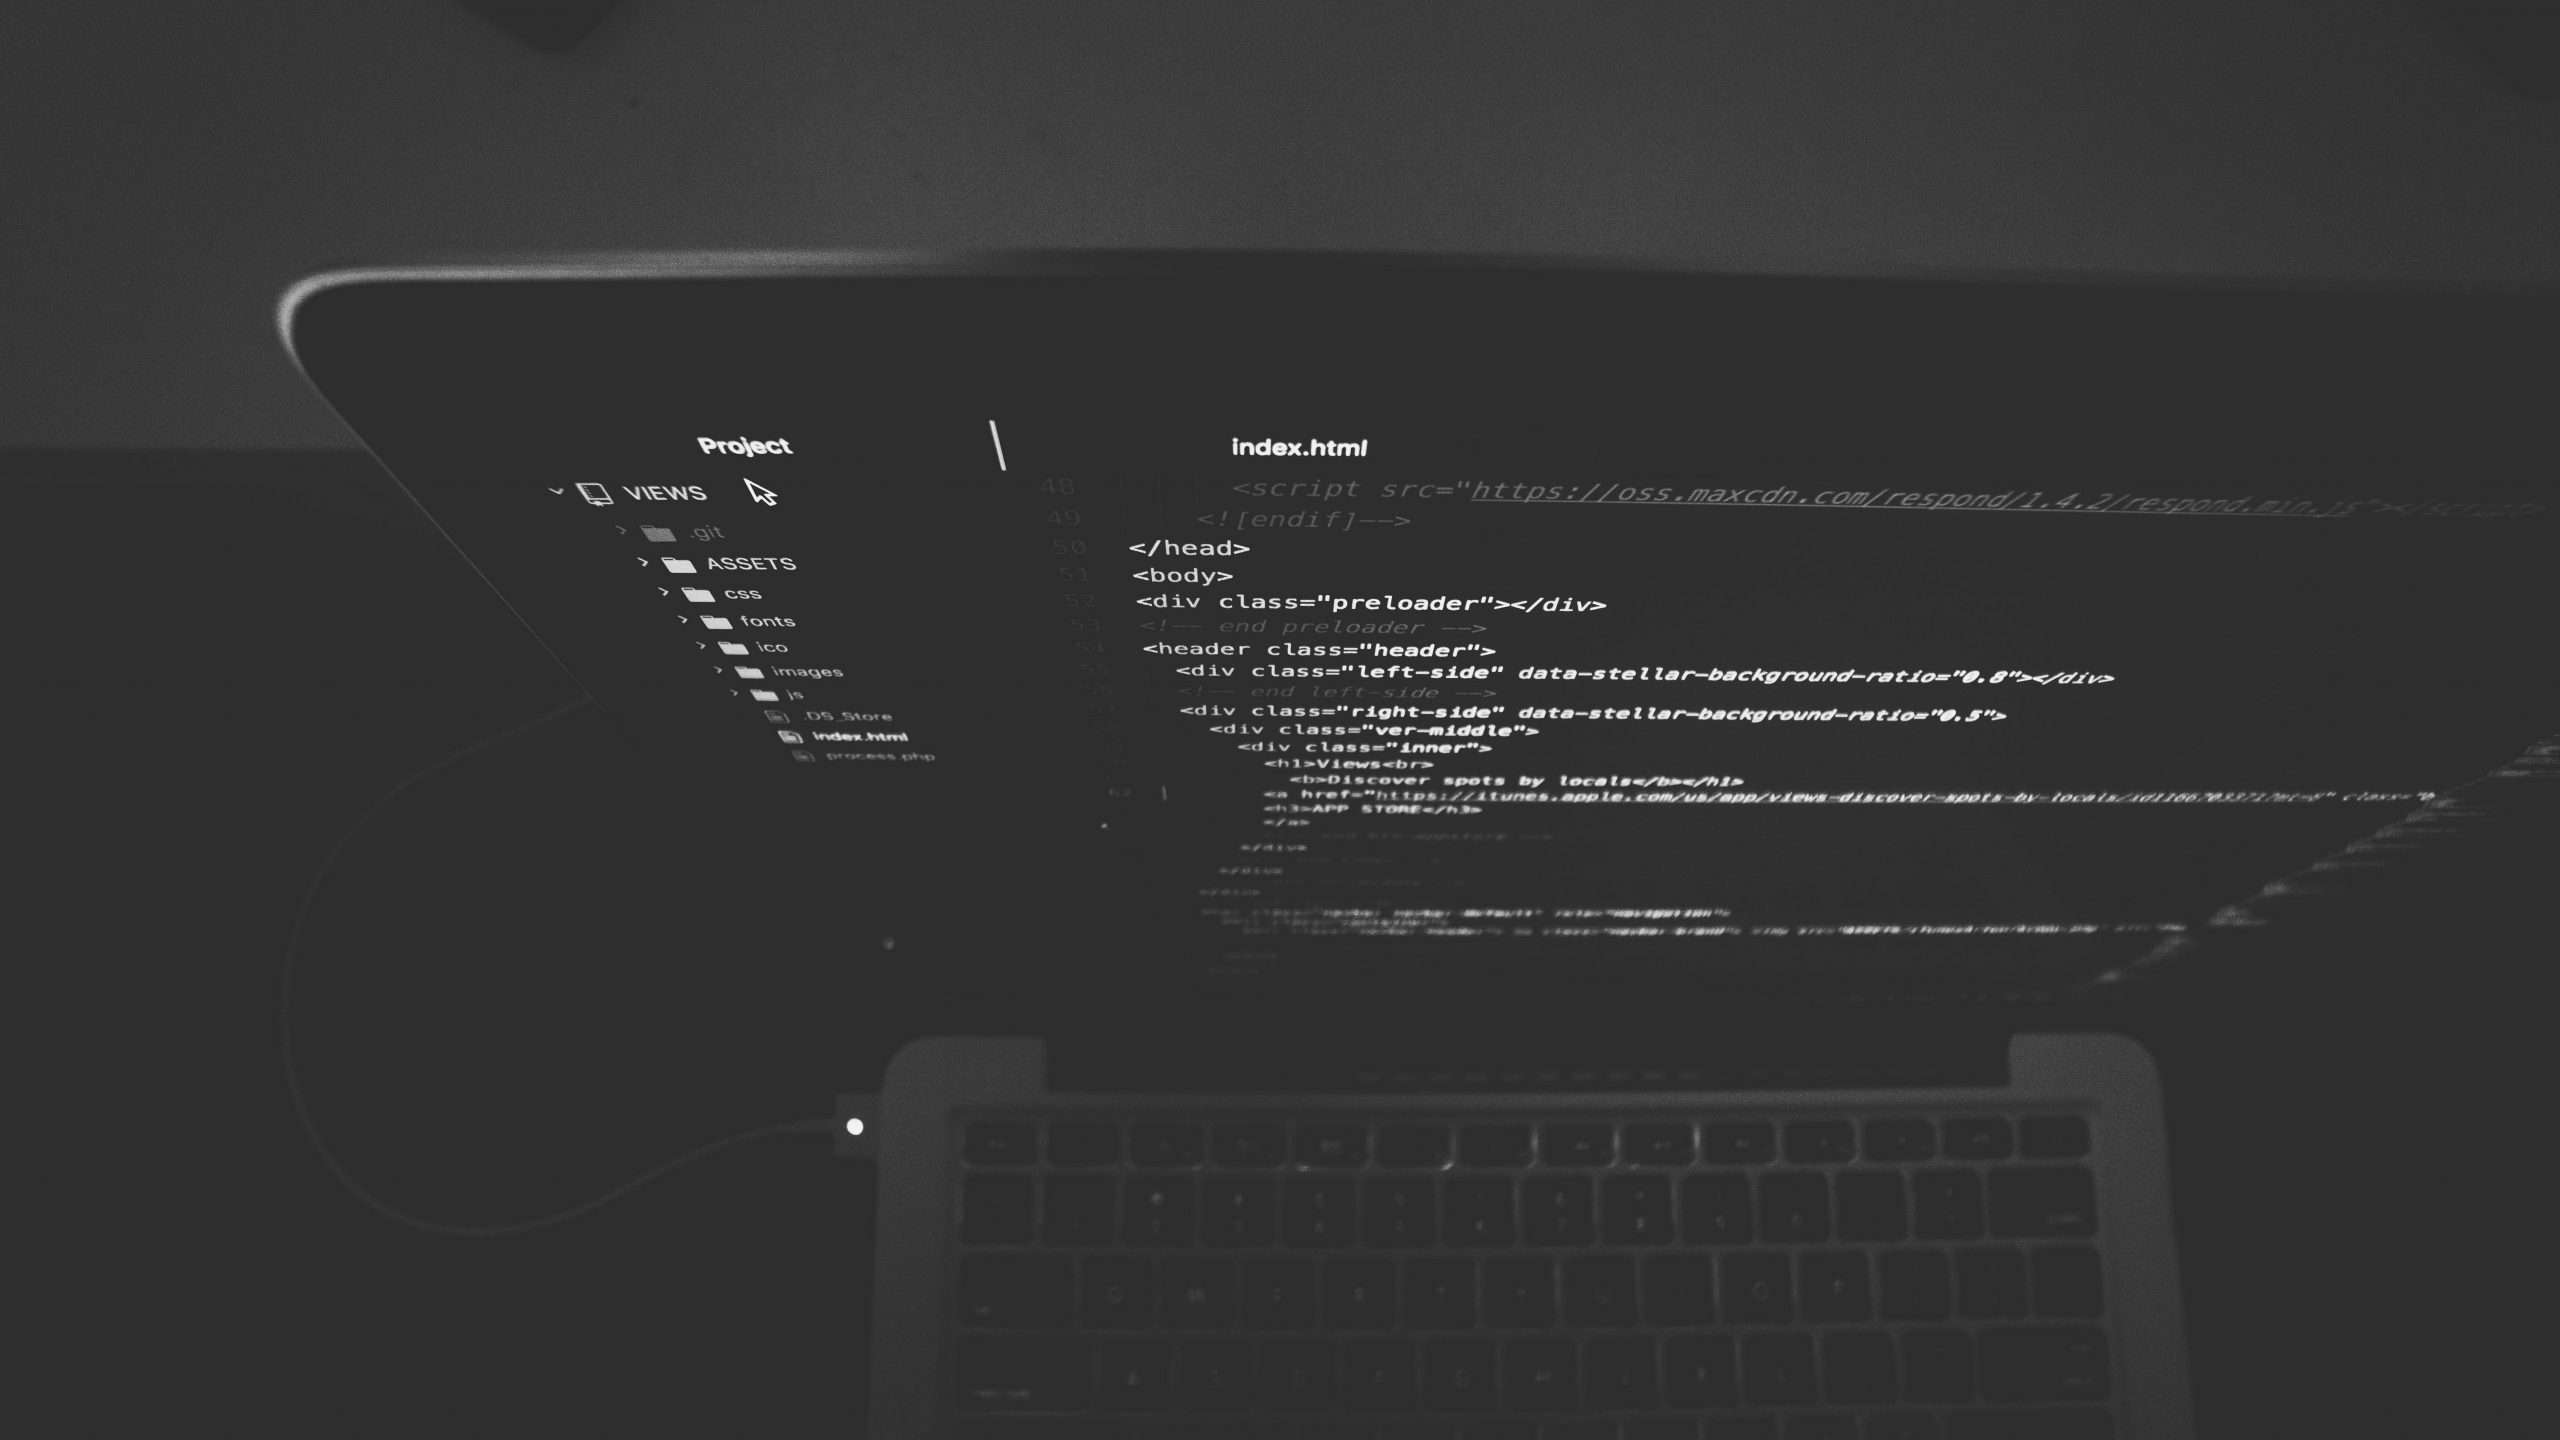 Coding Laptop Wallpapers - Wallpaper Cave